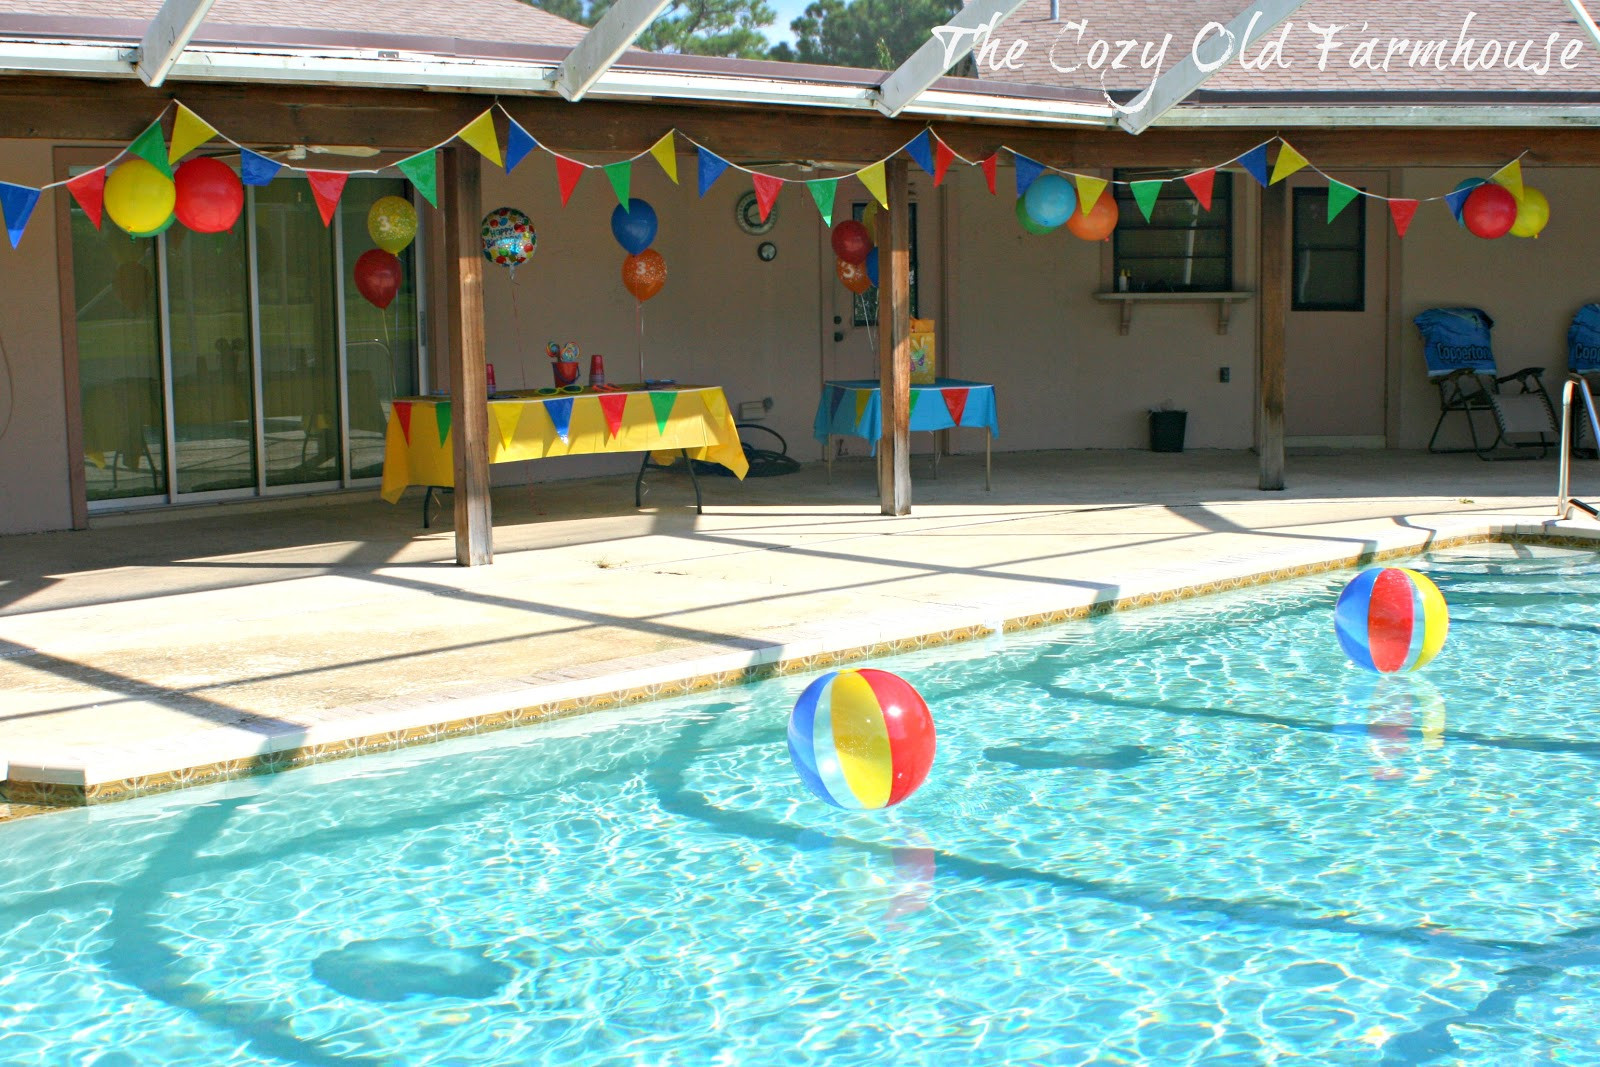 Pool Party Decoration Ideas
 The Cozy Old "Farmhouse" Simple and Bud Friendly Pool